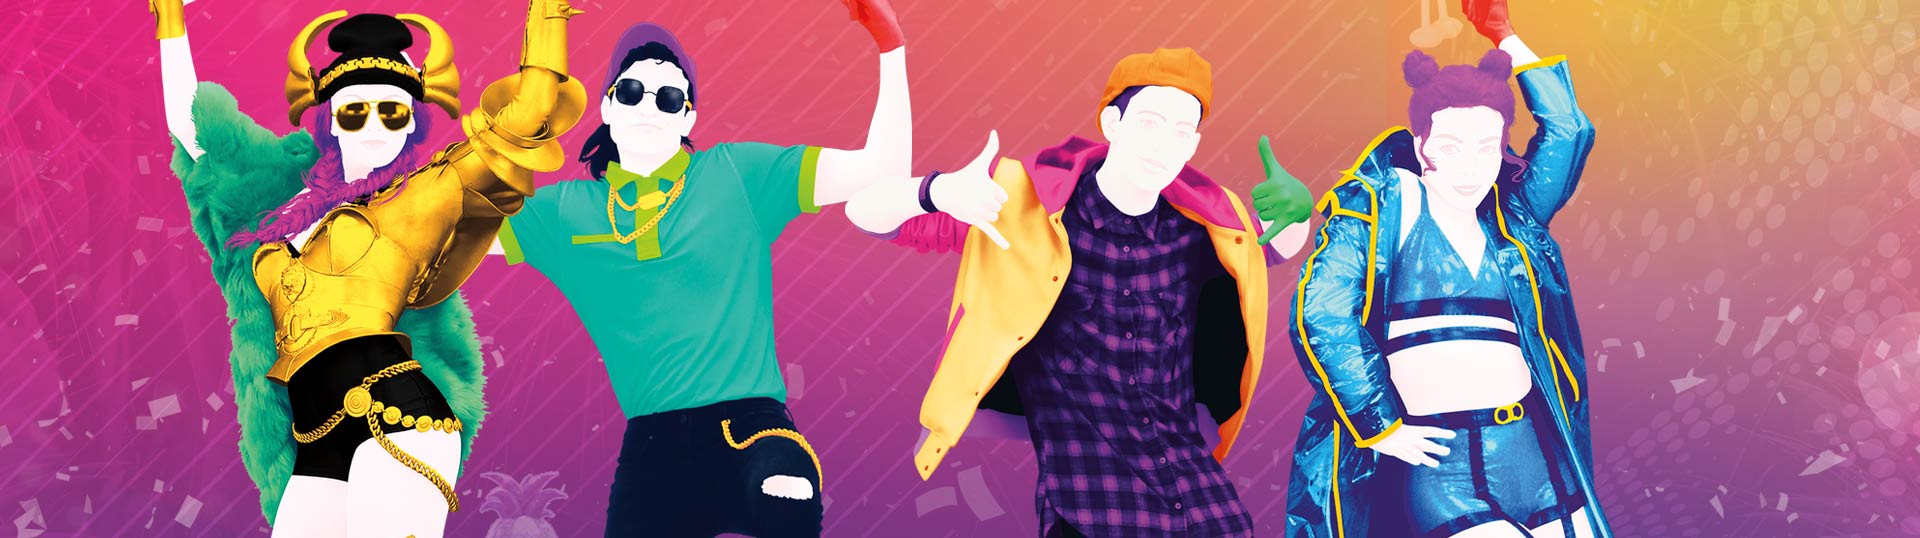 Just Dance 2020 Switch | Ubisoft Store France